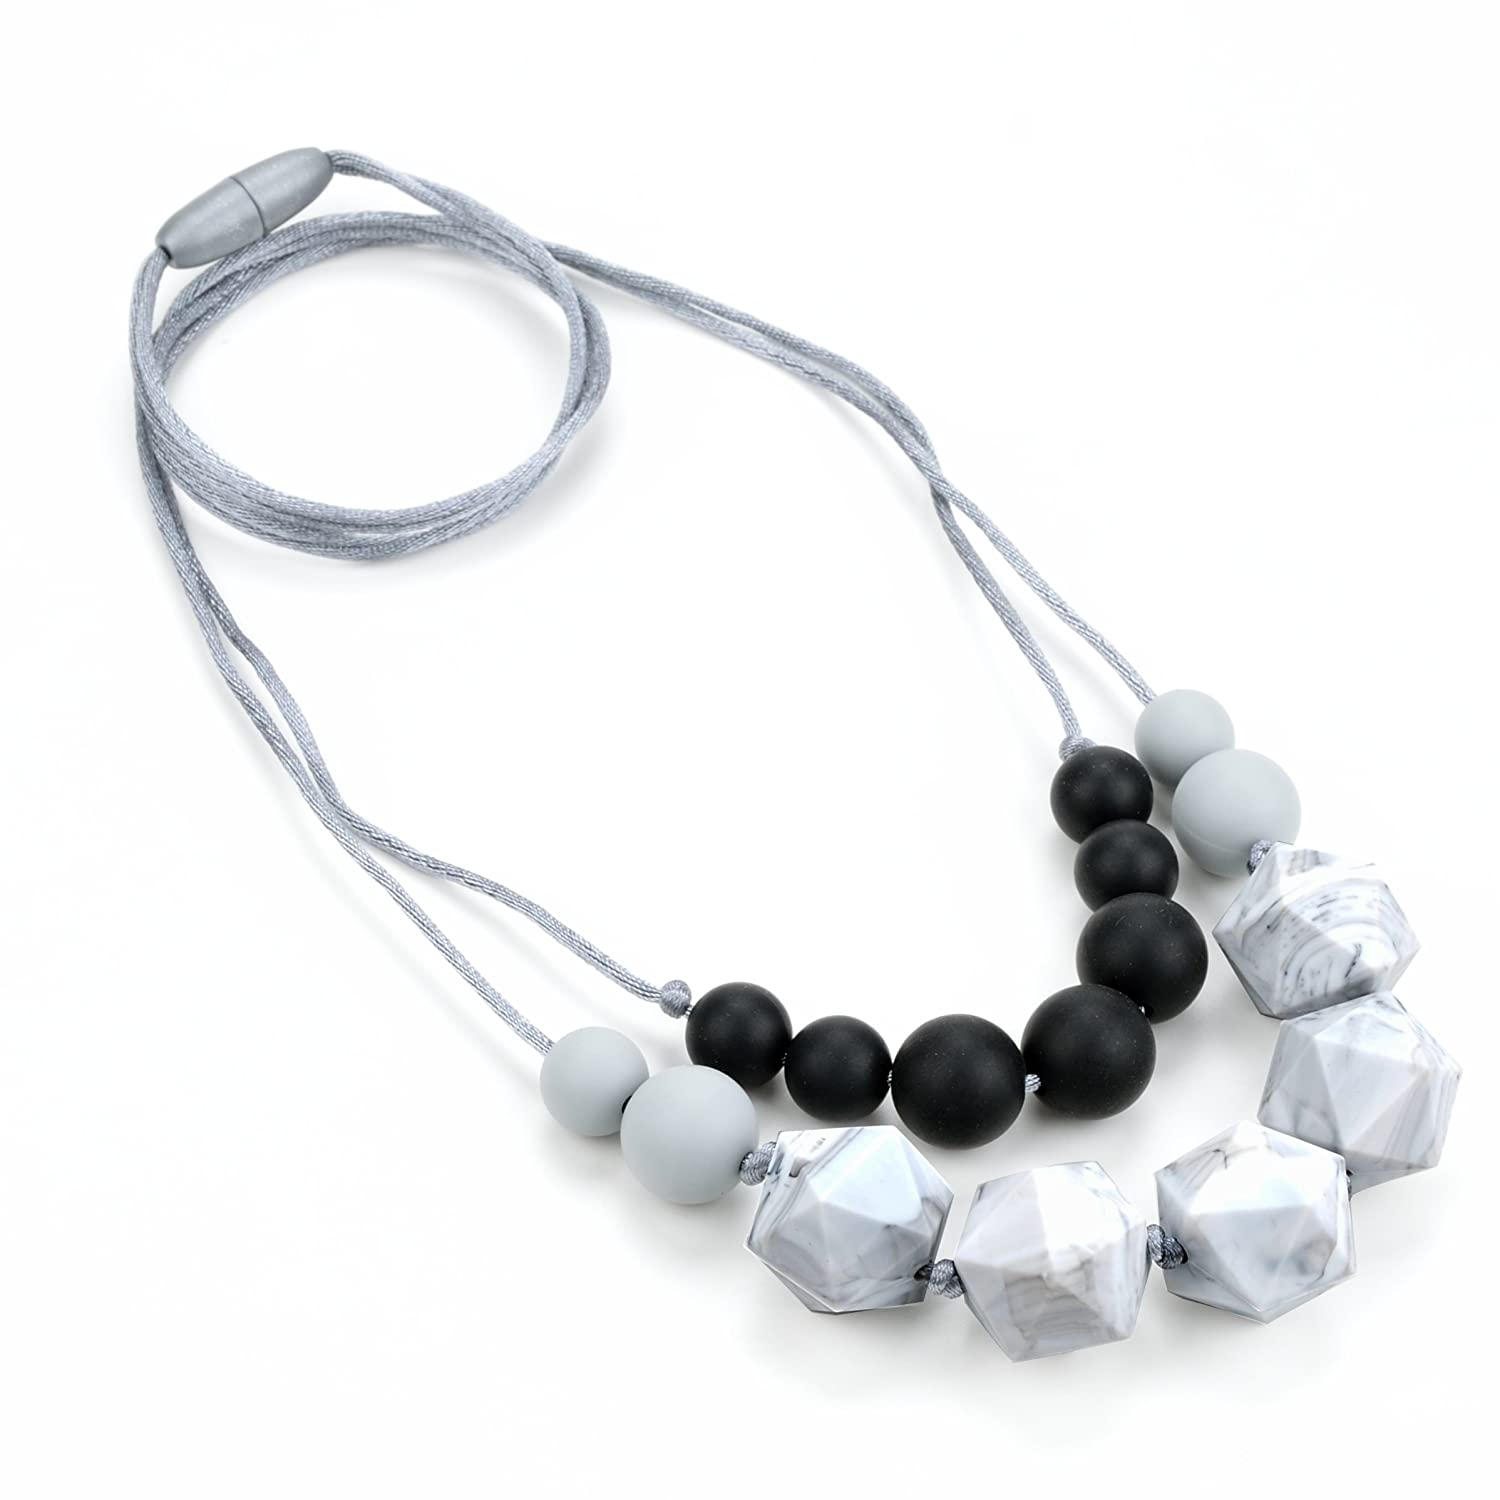 Lofca Baby Teething Necklace for Mom to Wear-Great Teether Toy